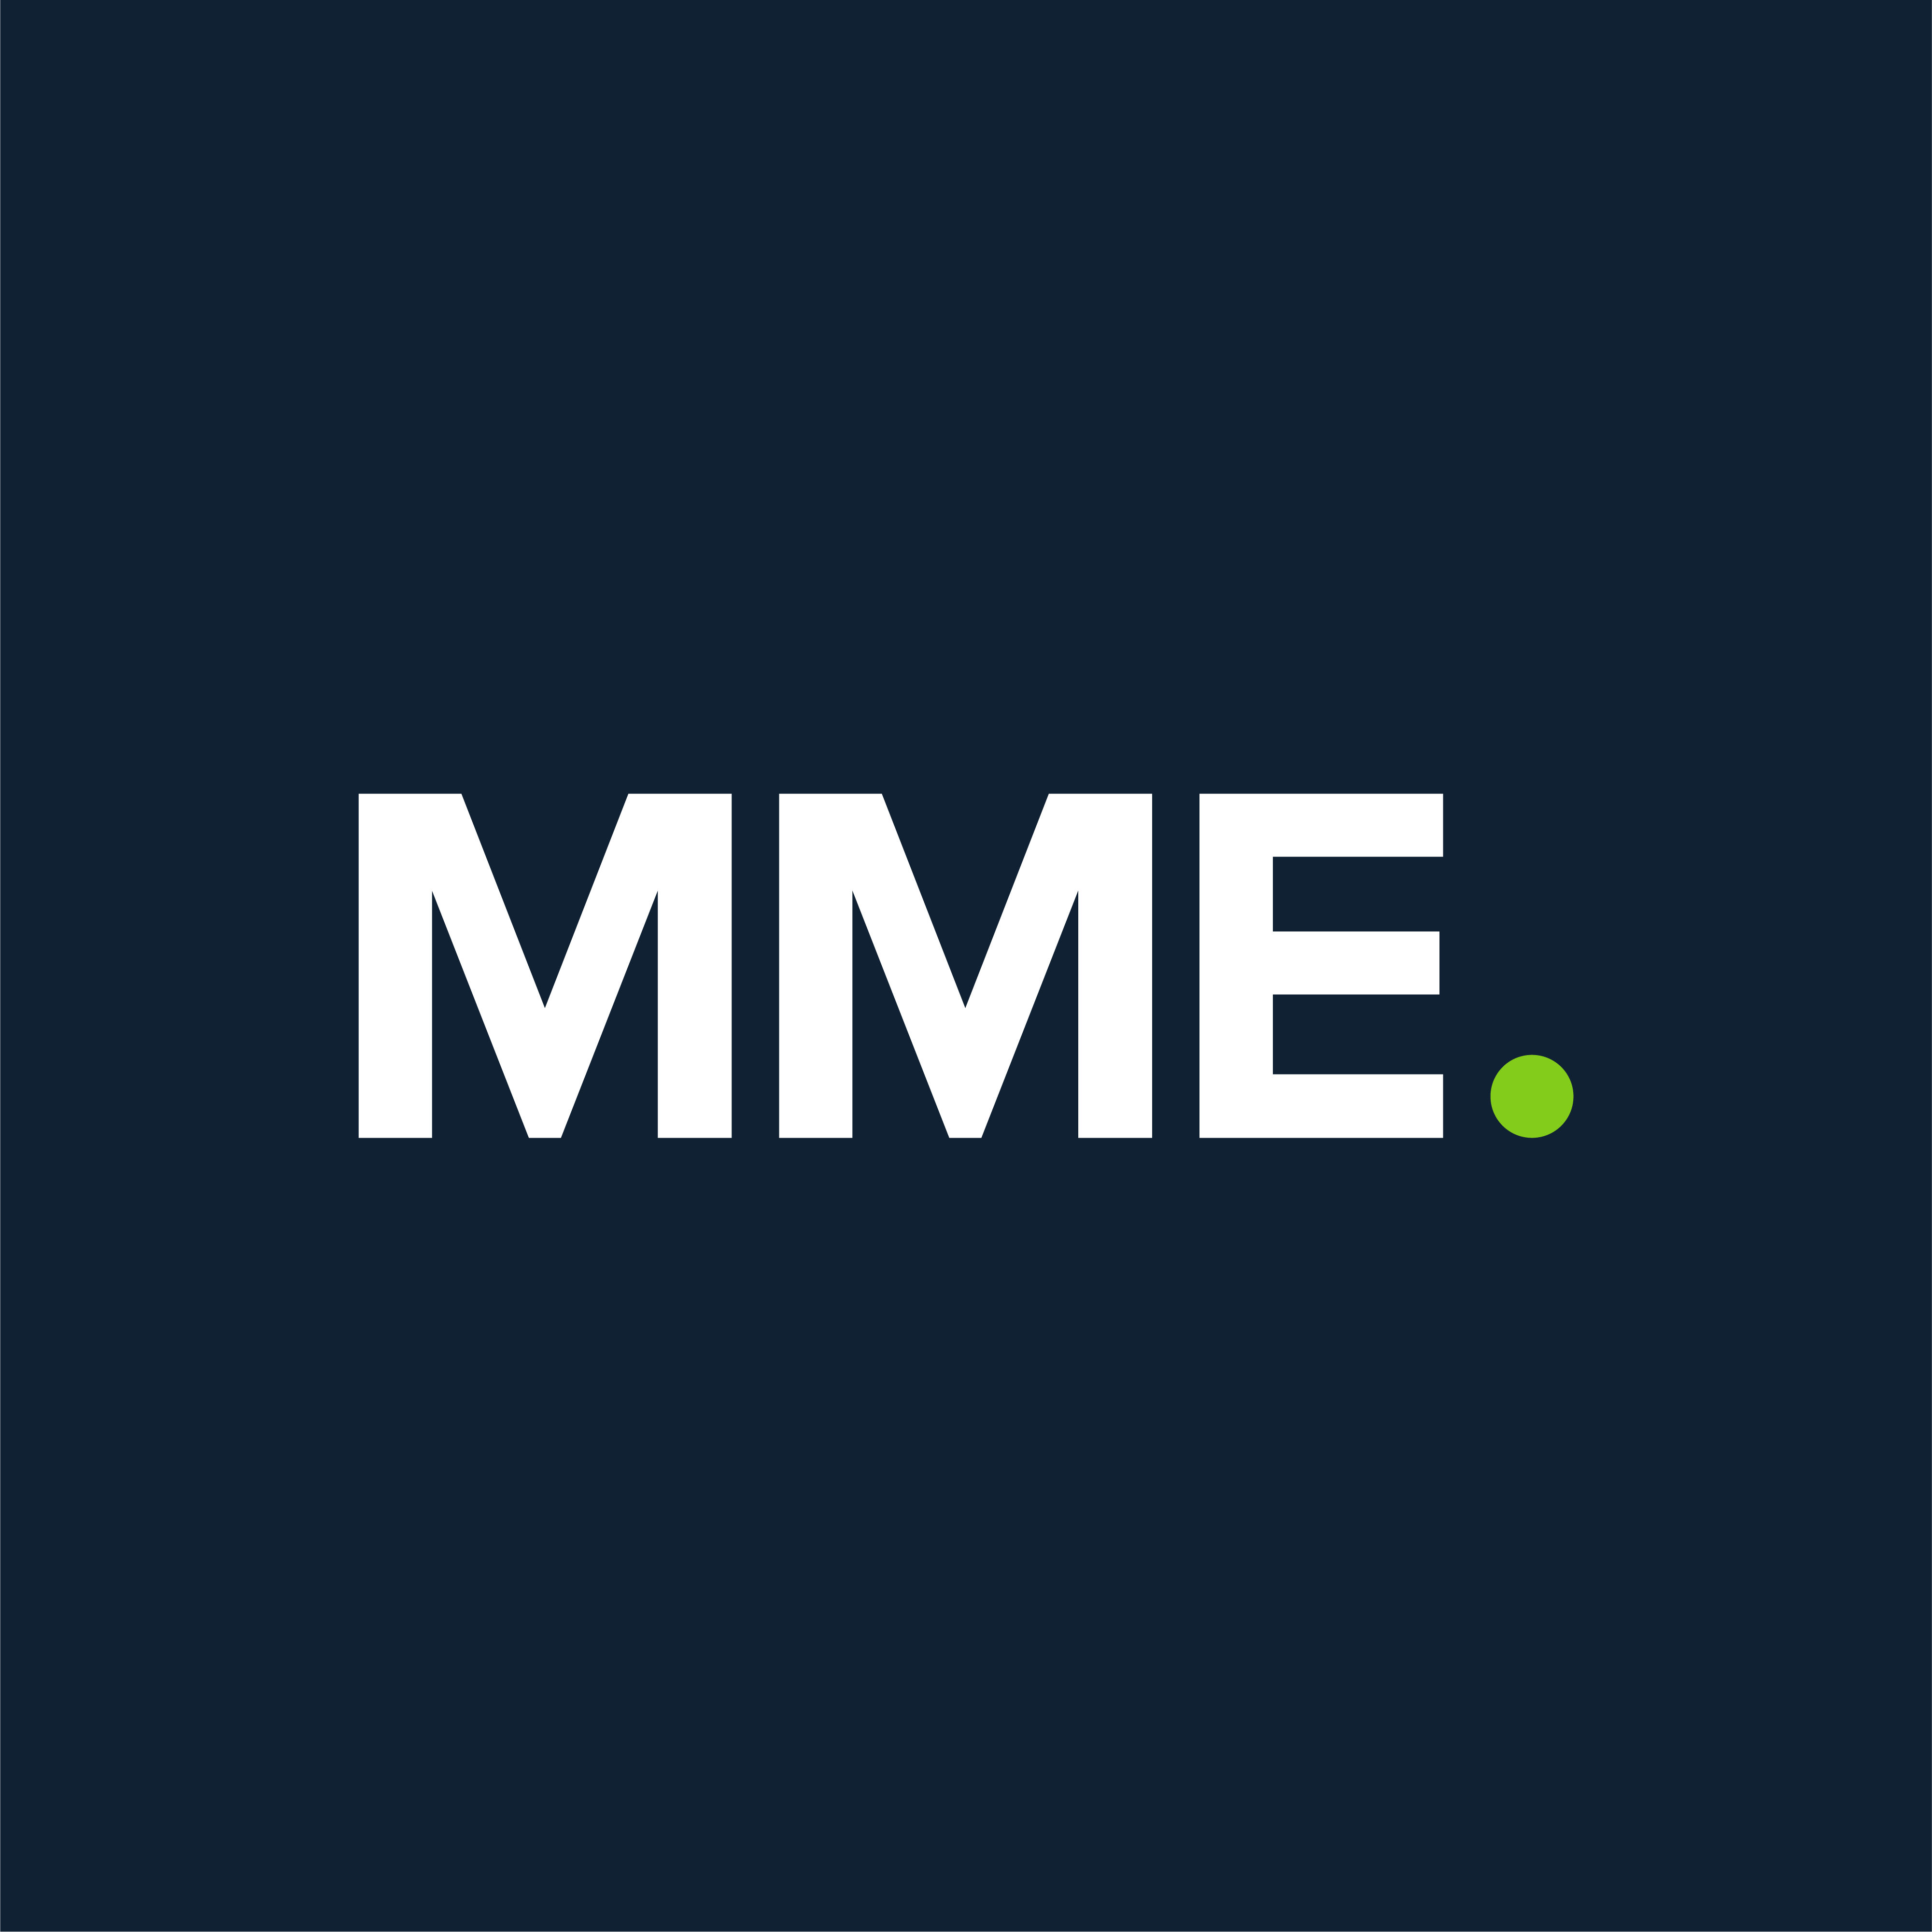 The company logo for MME